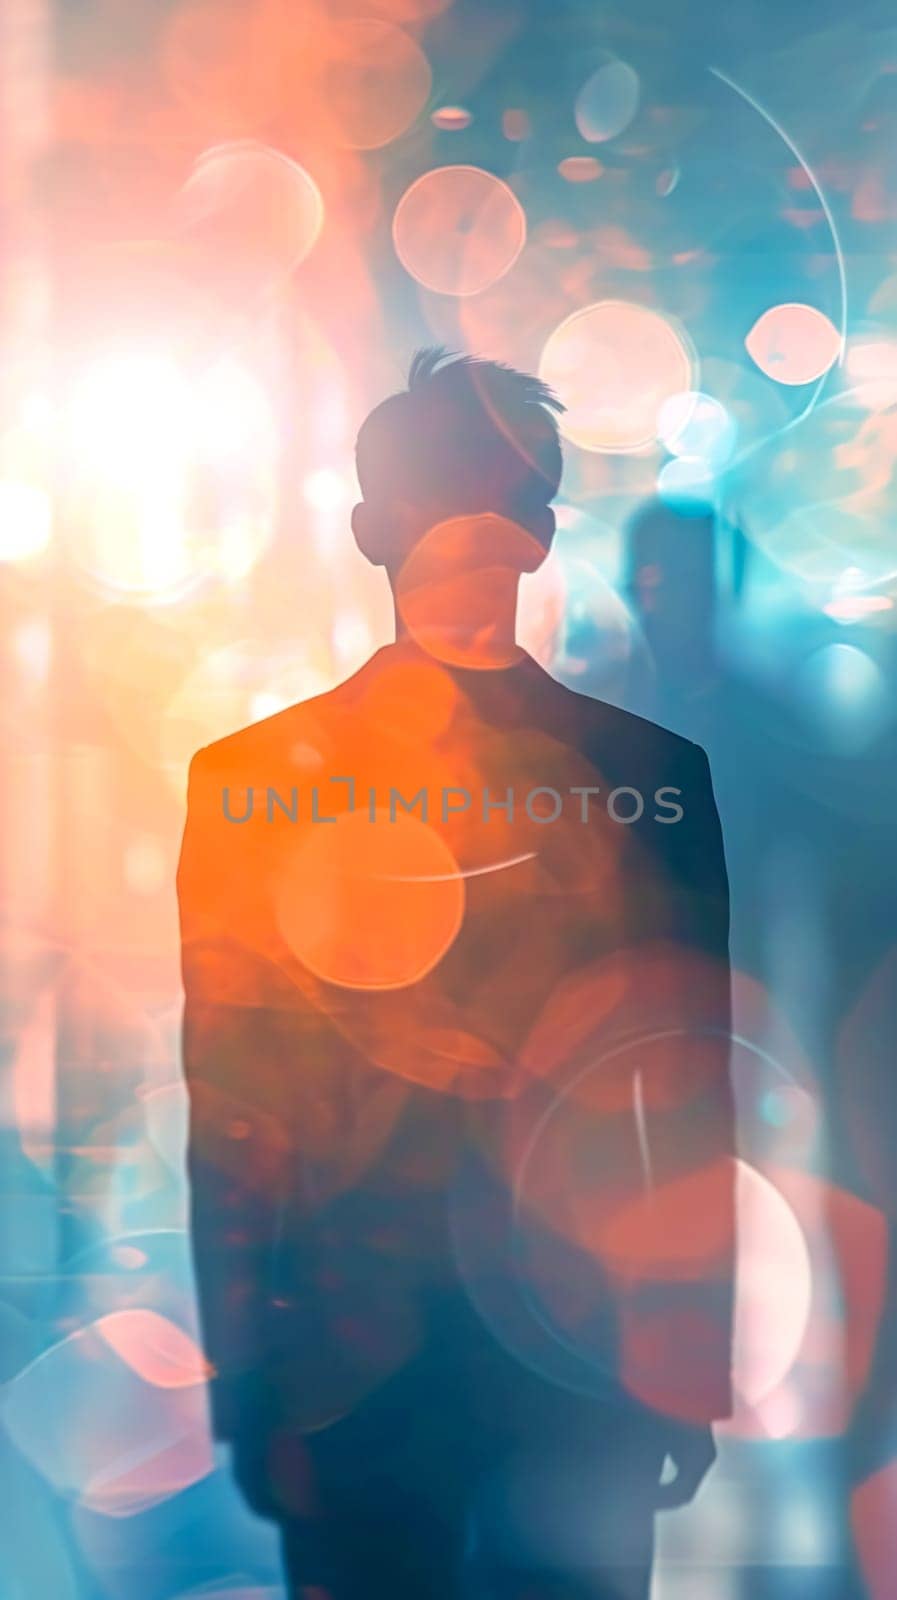 silhouette of a person set against a backdrop of radiant, multicolored bokeh lights, creating an abstract and inspirational mood with a focus on leadership and forward-thinking by Edophoto